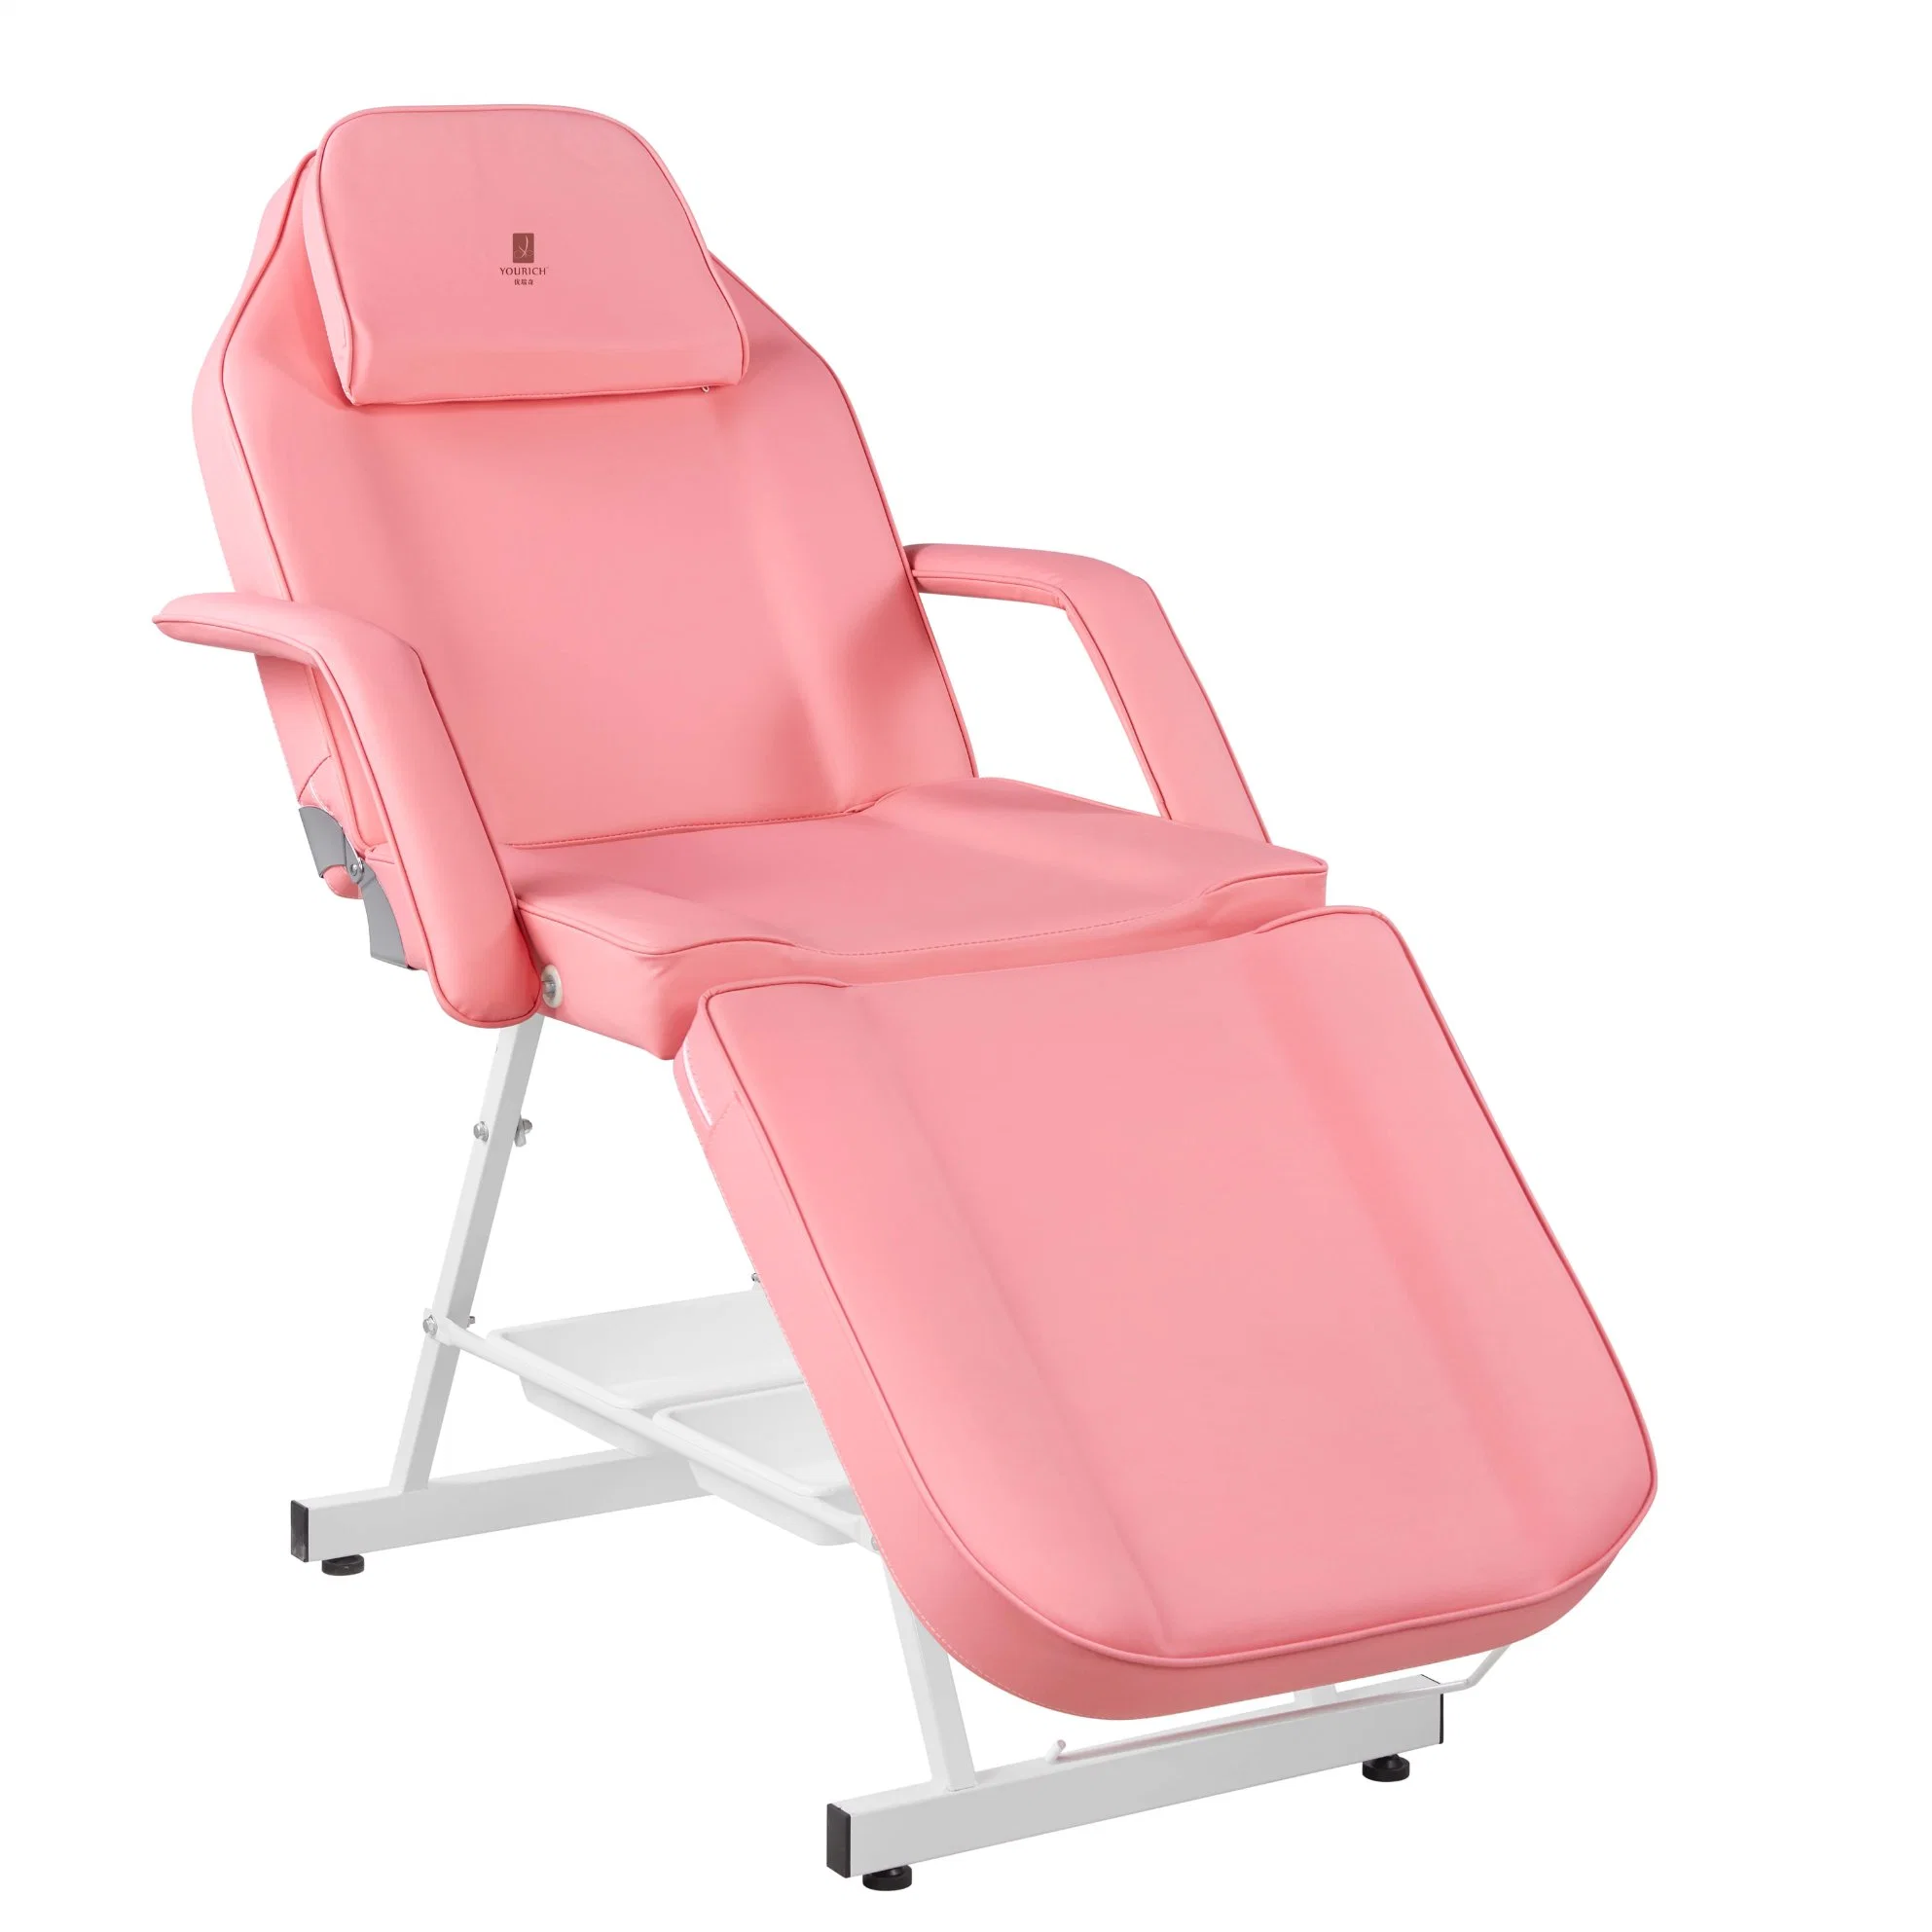 Massage Table with Storage Box Facial Chair Salon Beauty SPA Furniture